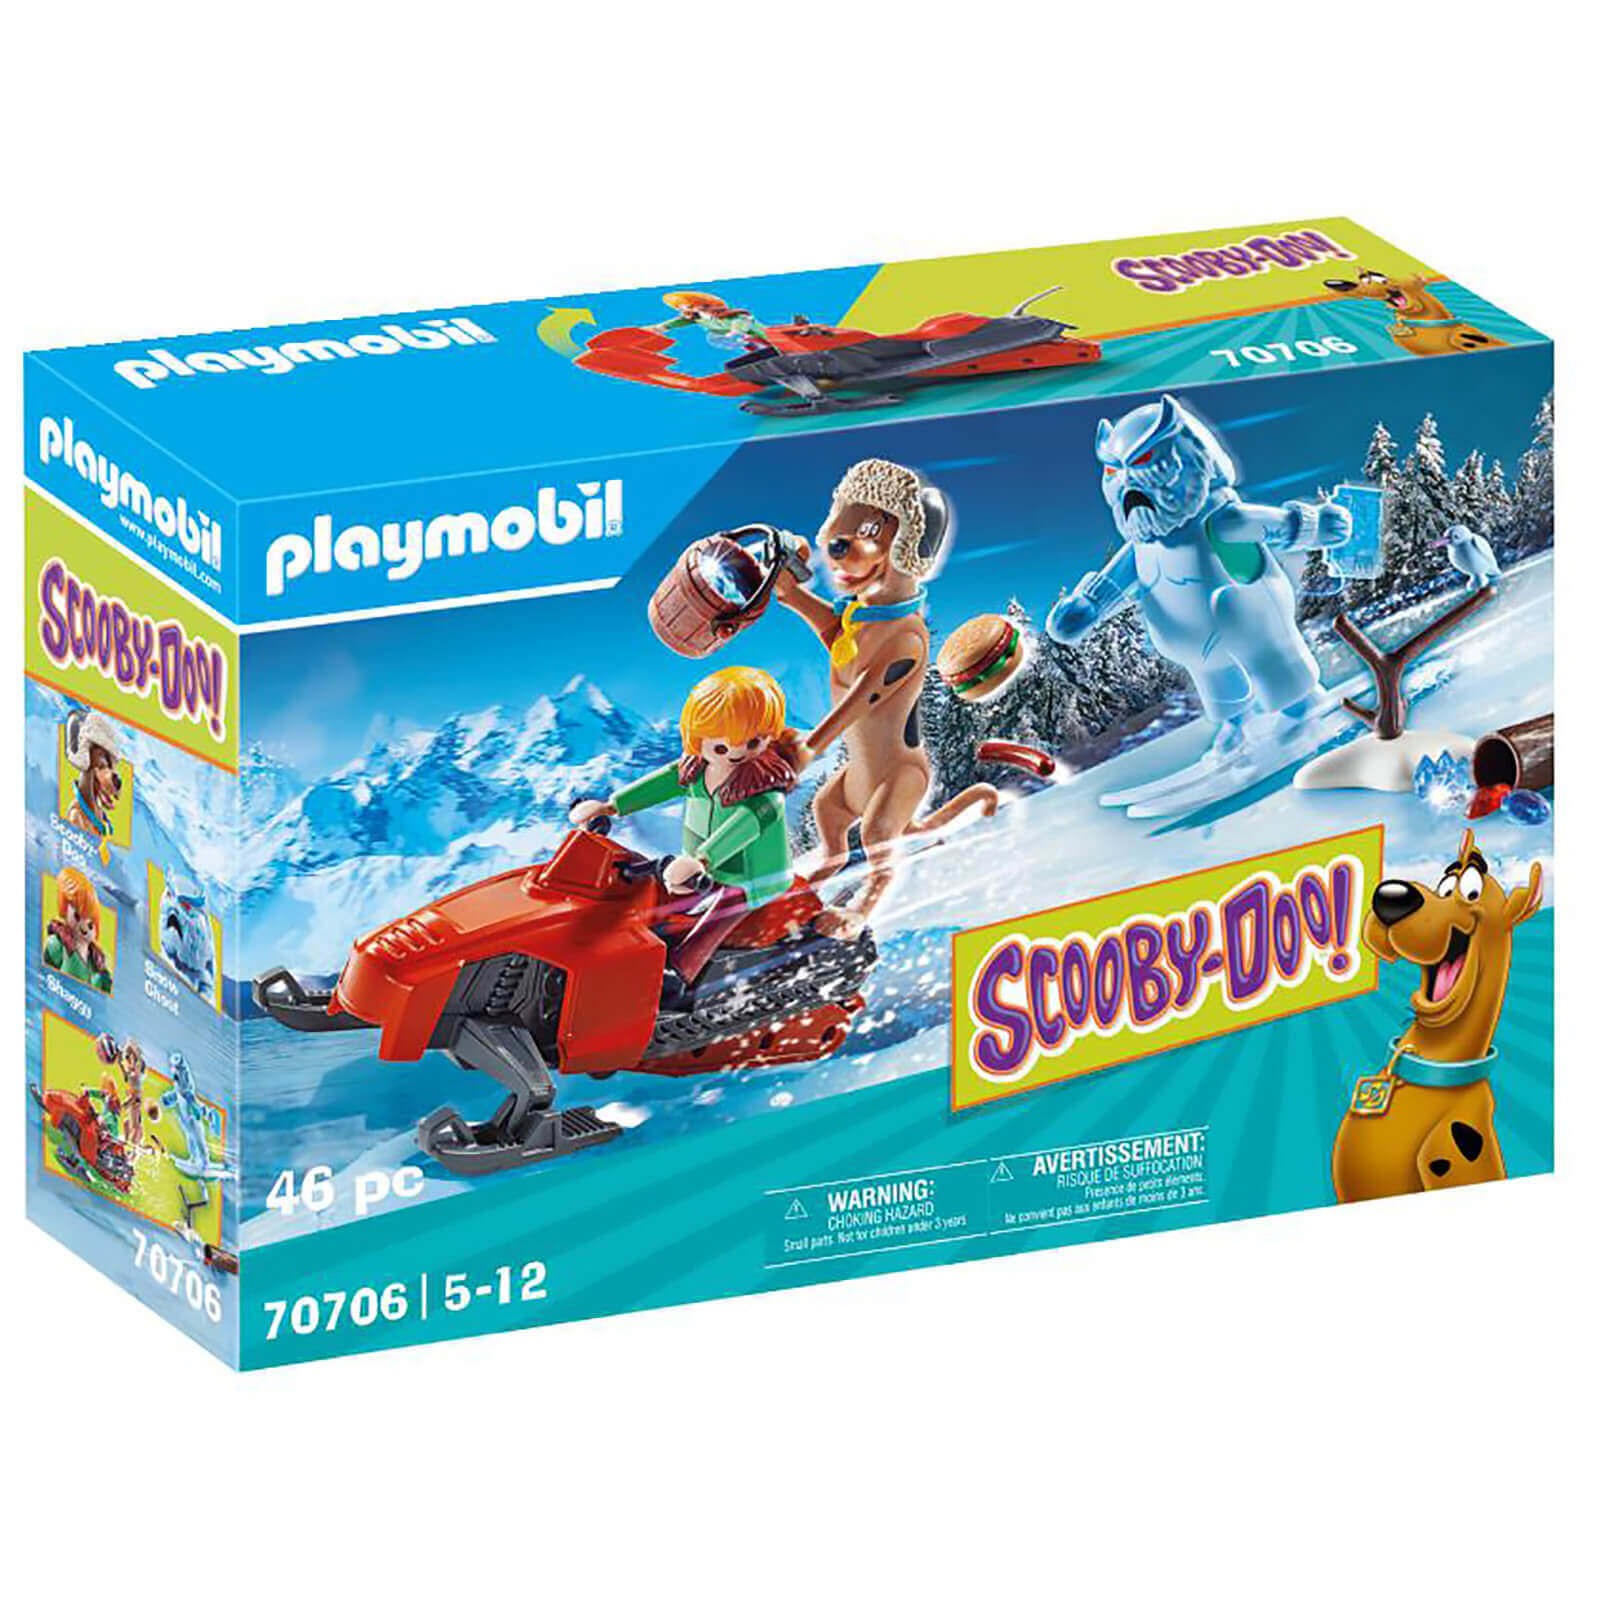 Playmobil SCOOBY-DOO! Adventure with Snow Ghost (70706)